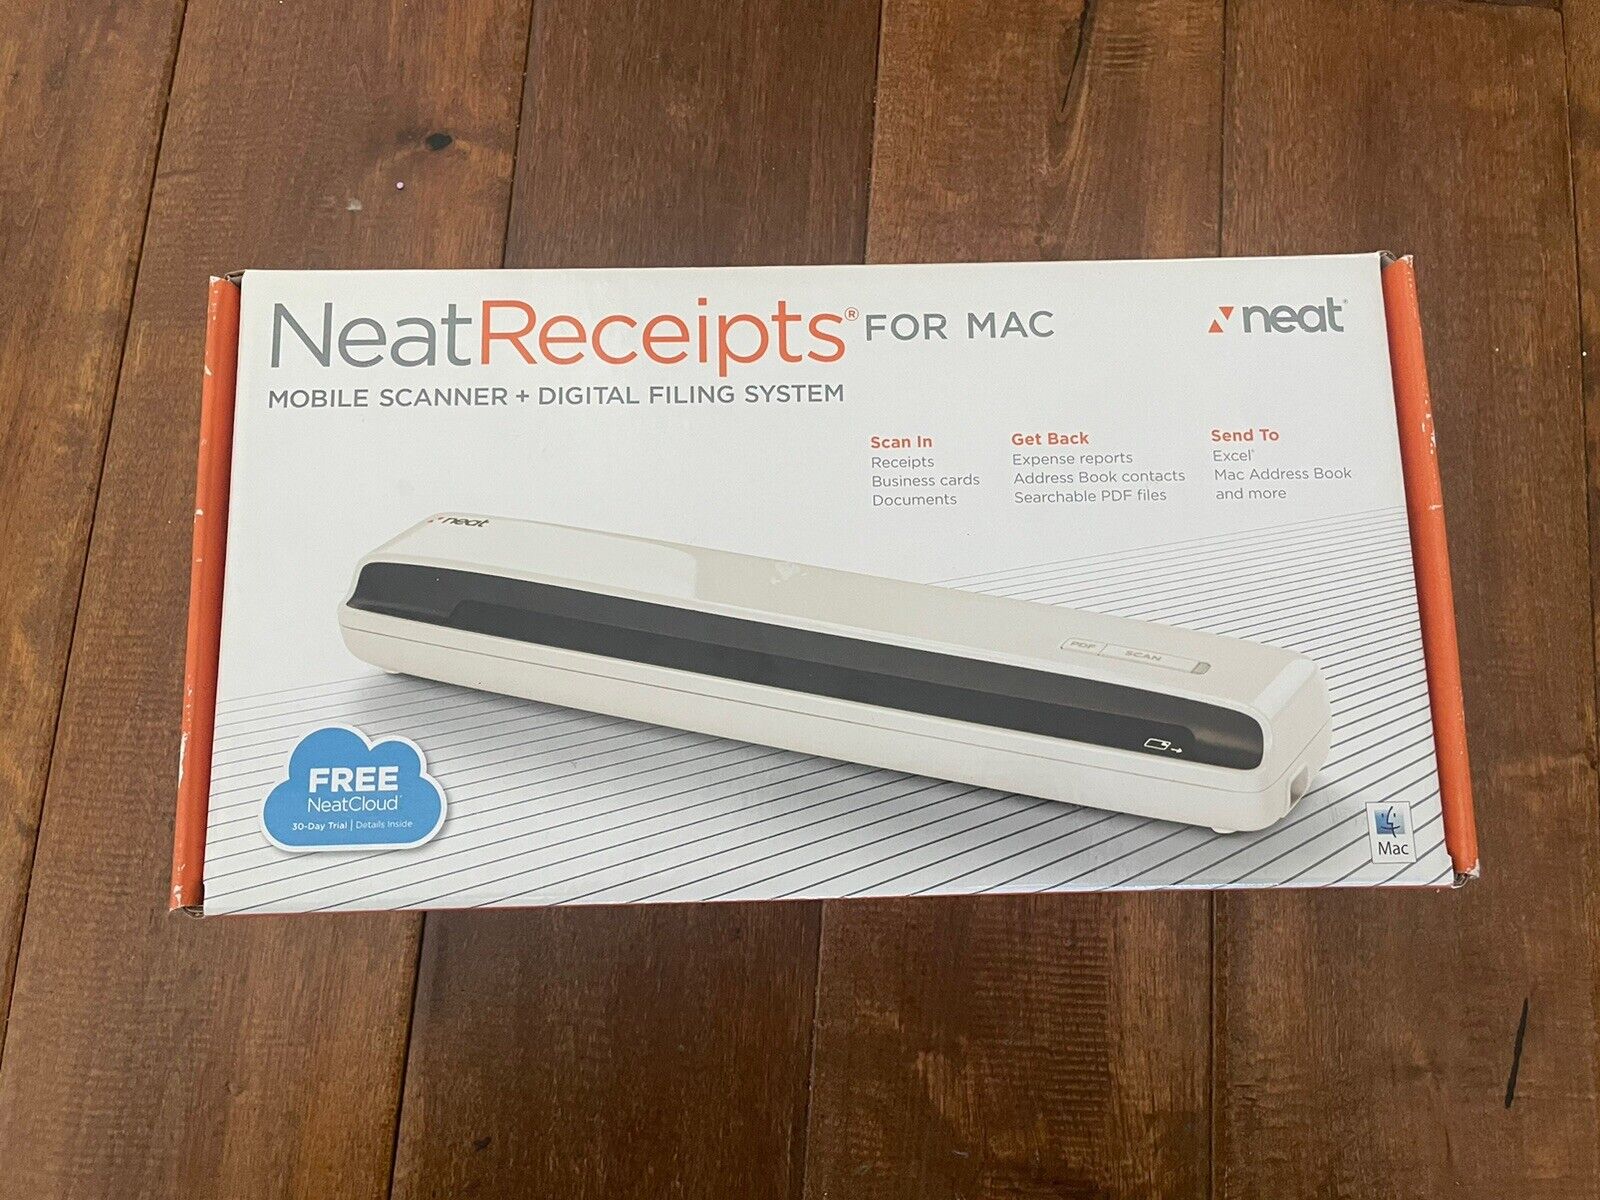 Neat Receipts Mobile Scanner For Mac NM-1000 + New In Box